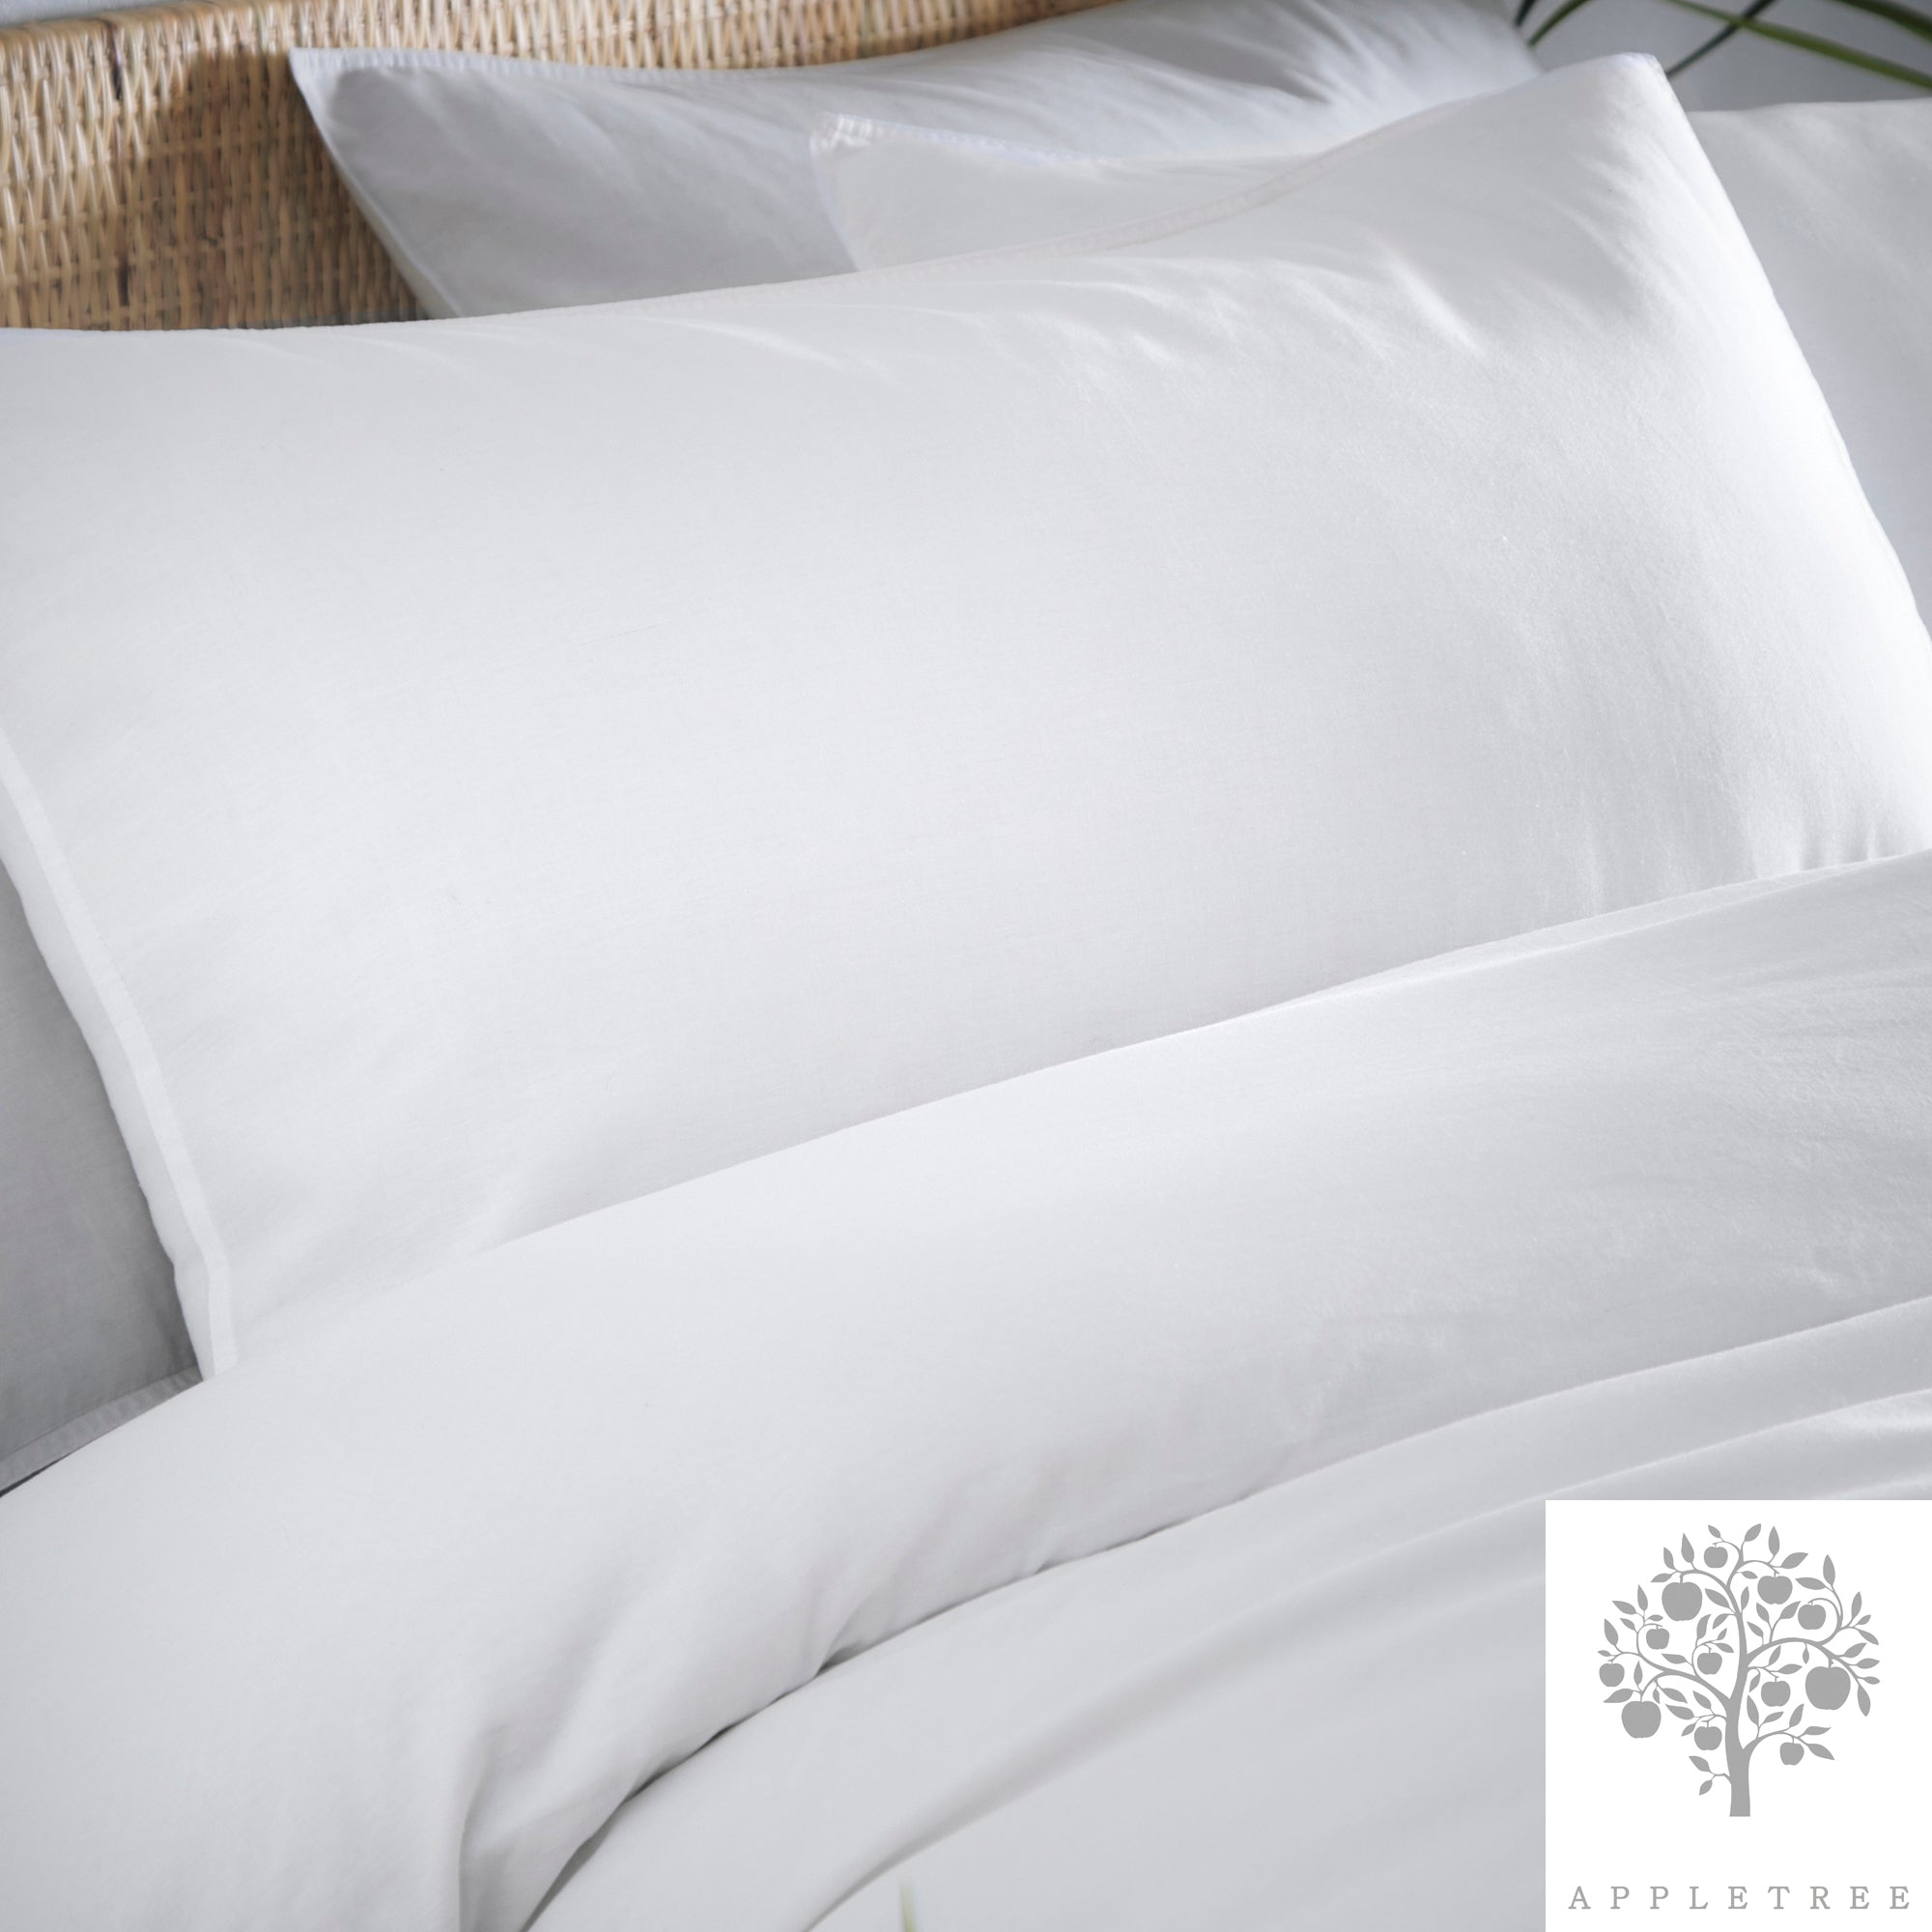 Cassia White - 100% Relaxed Cotton Duvet Cover Set - by Appletree Loft